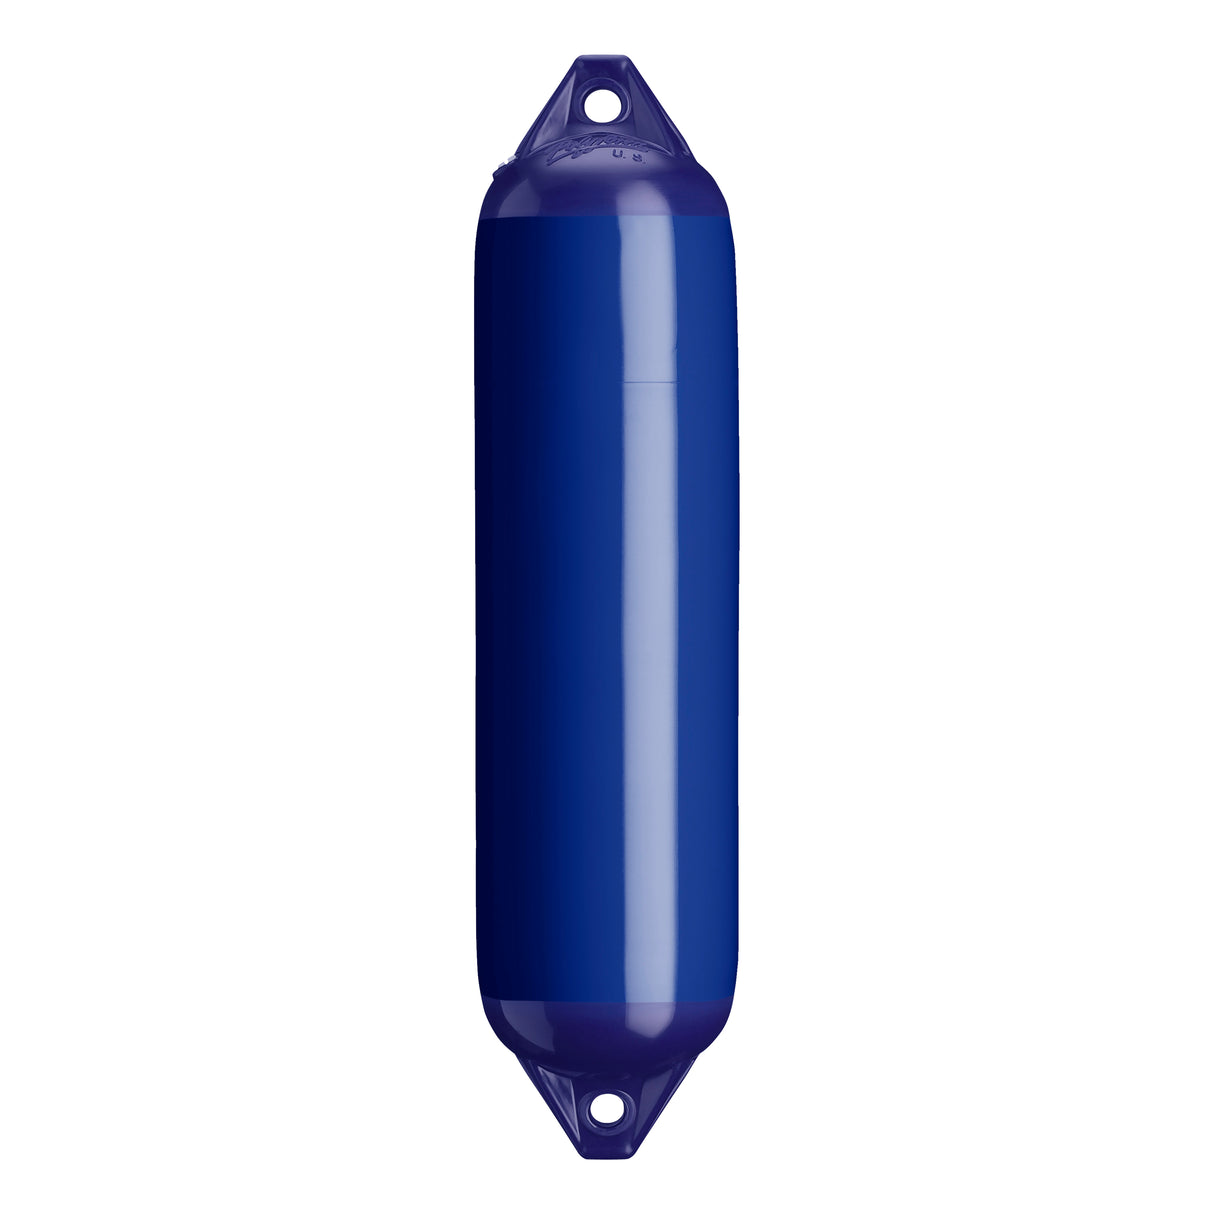 Cobalt Blue boat fender with Navy-Top, Polyform F-1 